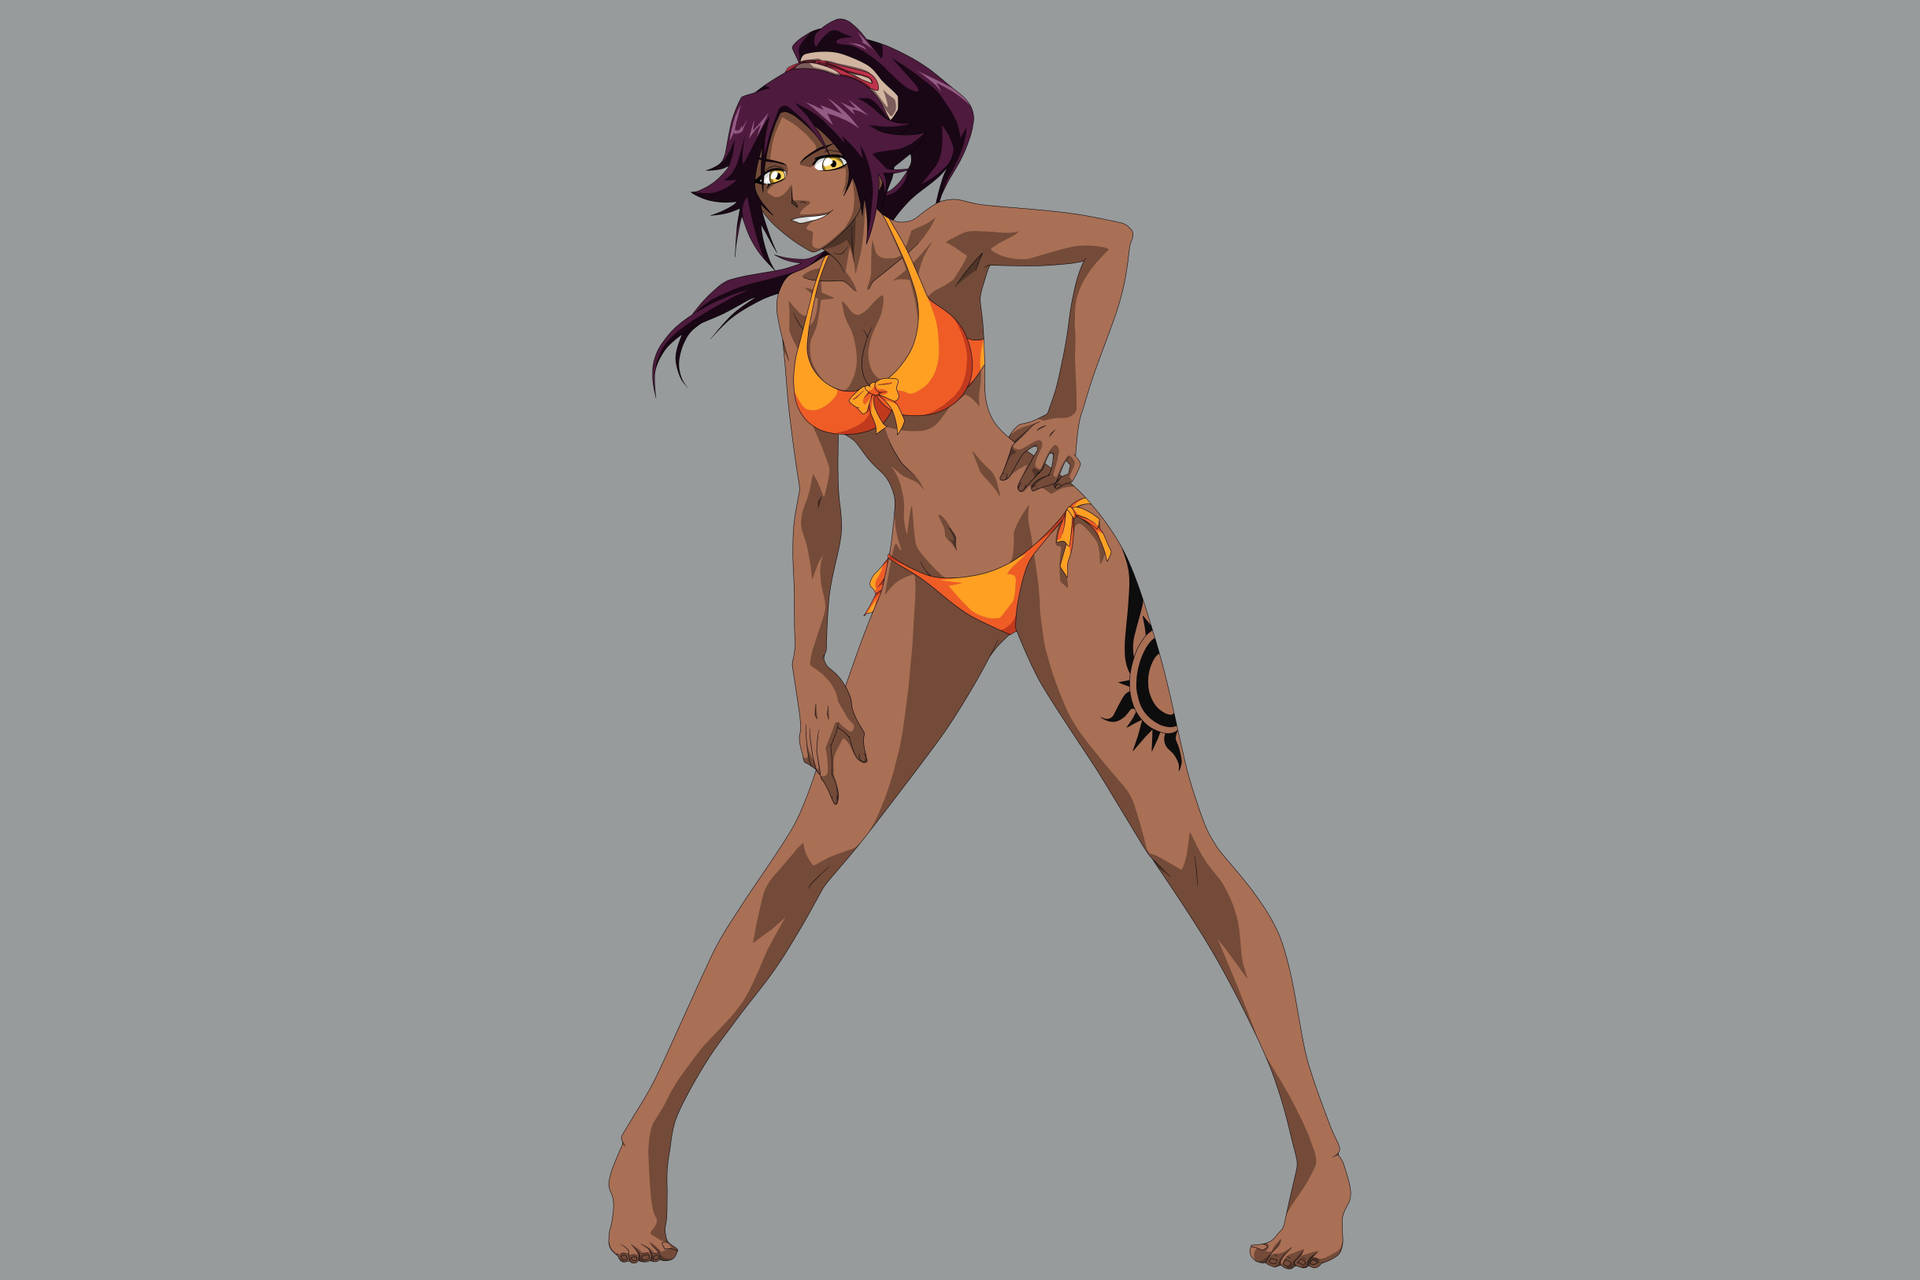 Caption: Yoruichi Shihouin In Swimwear - Revealing The Power And Beauty Of Stealth